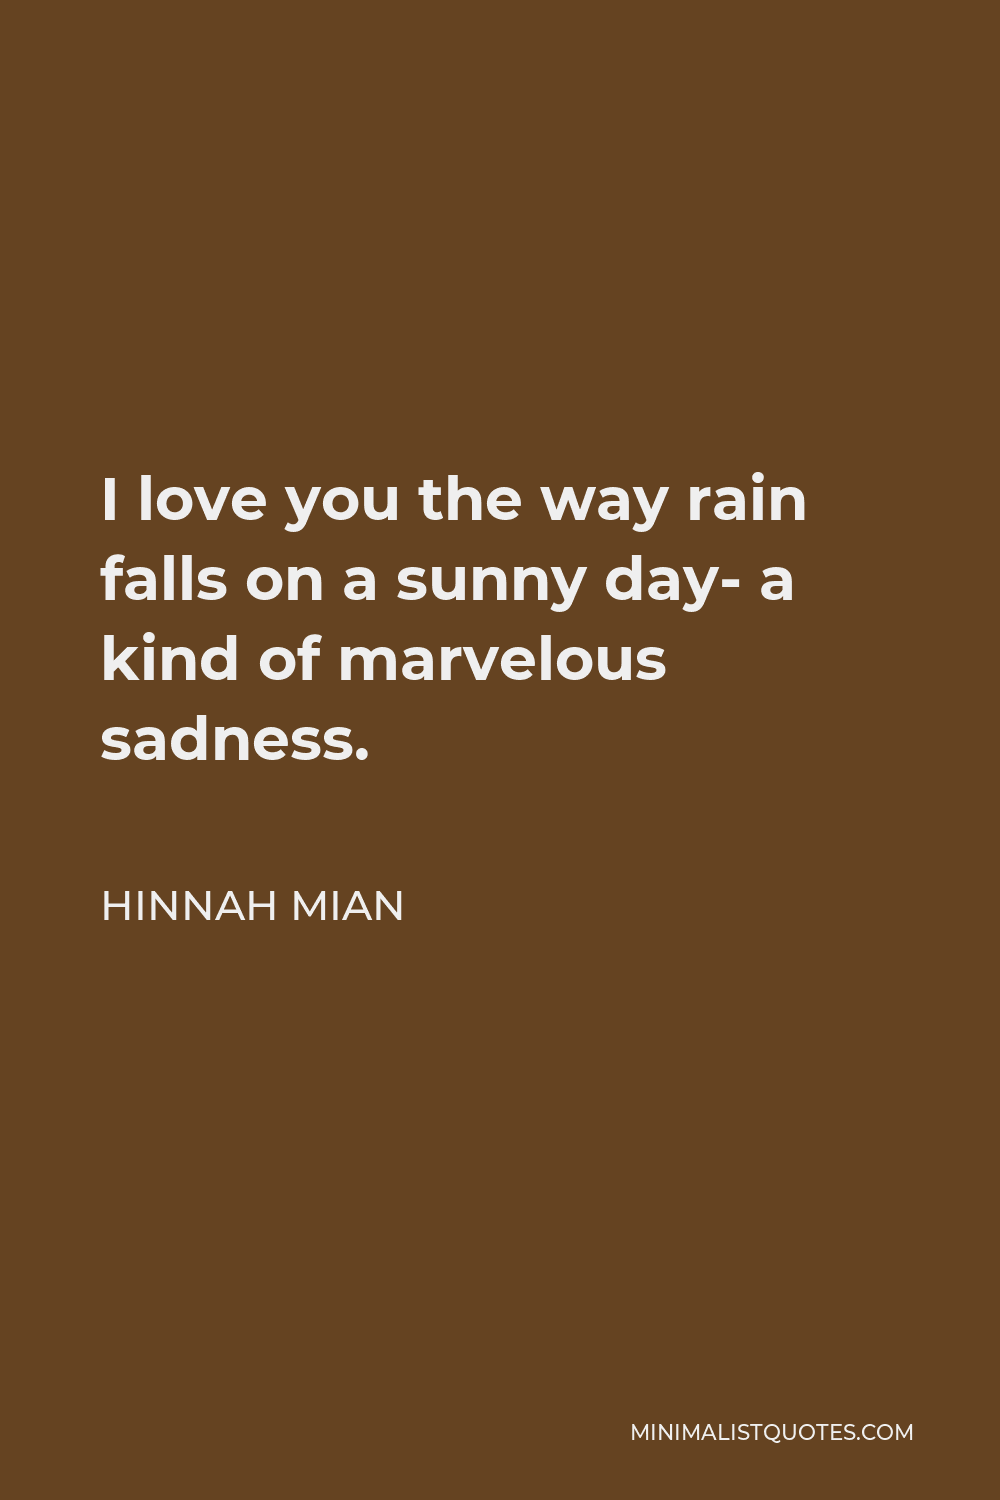 Hinnah Mian Quote - I love you the way rain falls on a sunny day- a kind of marvelous sadness.